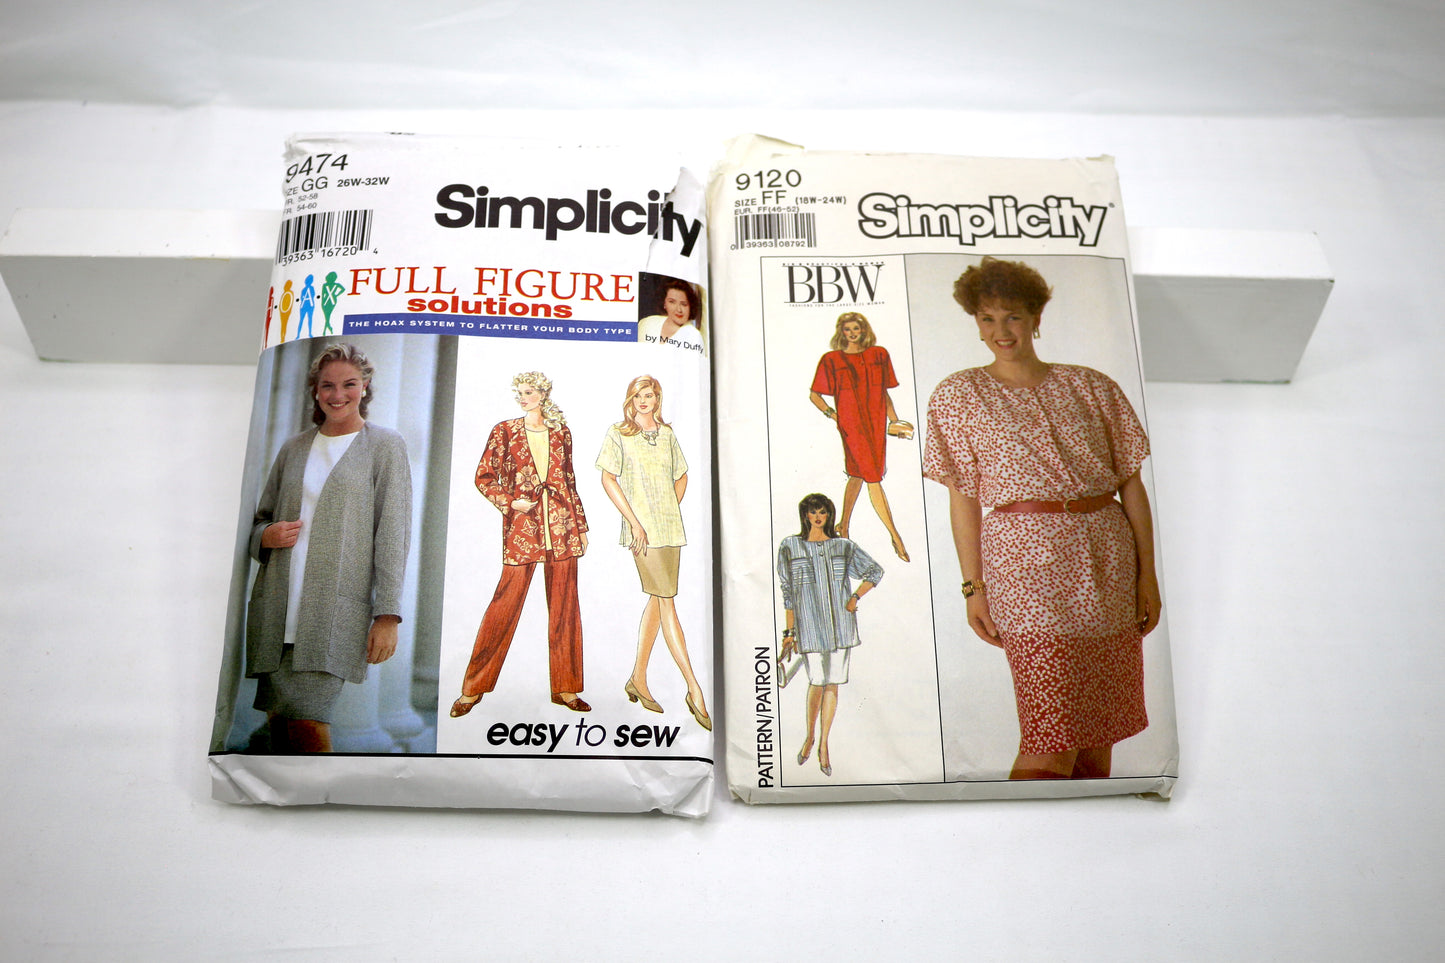 Simplicity 9474 Womens Separates or SImplicity 9120 Womens Dress, Tunic